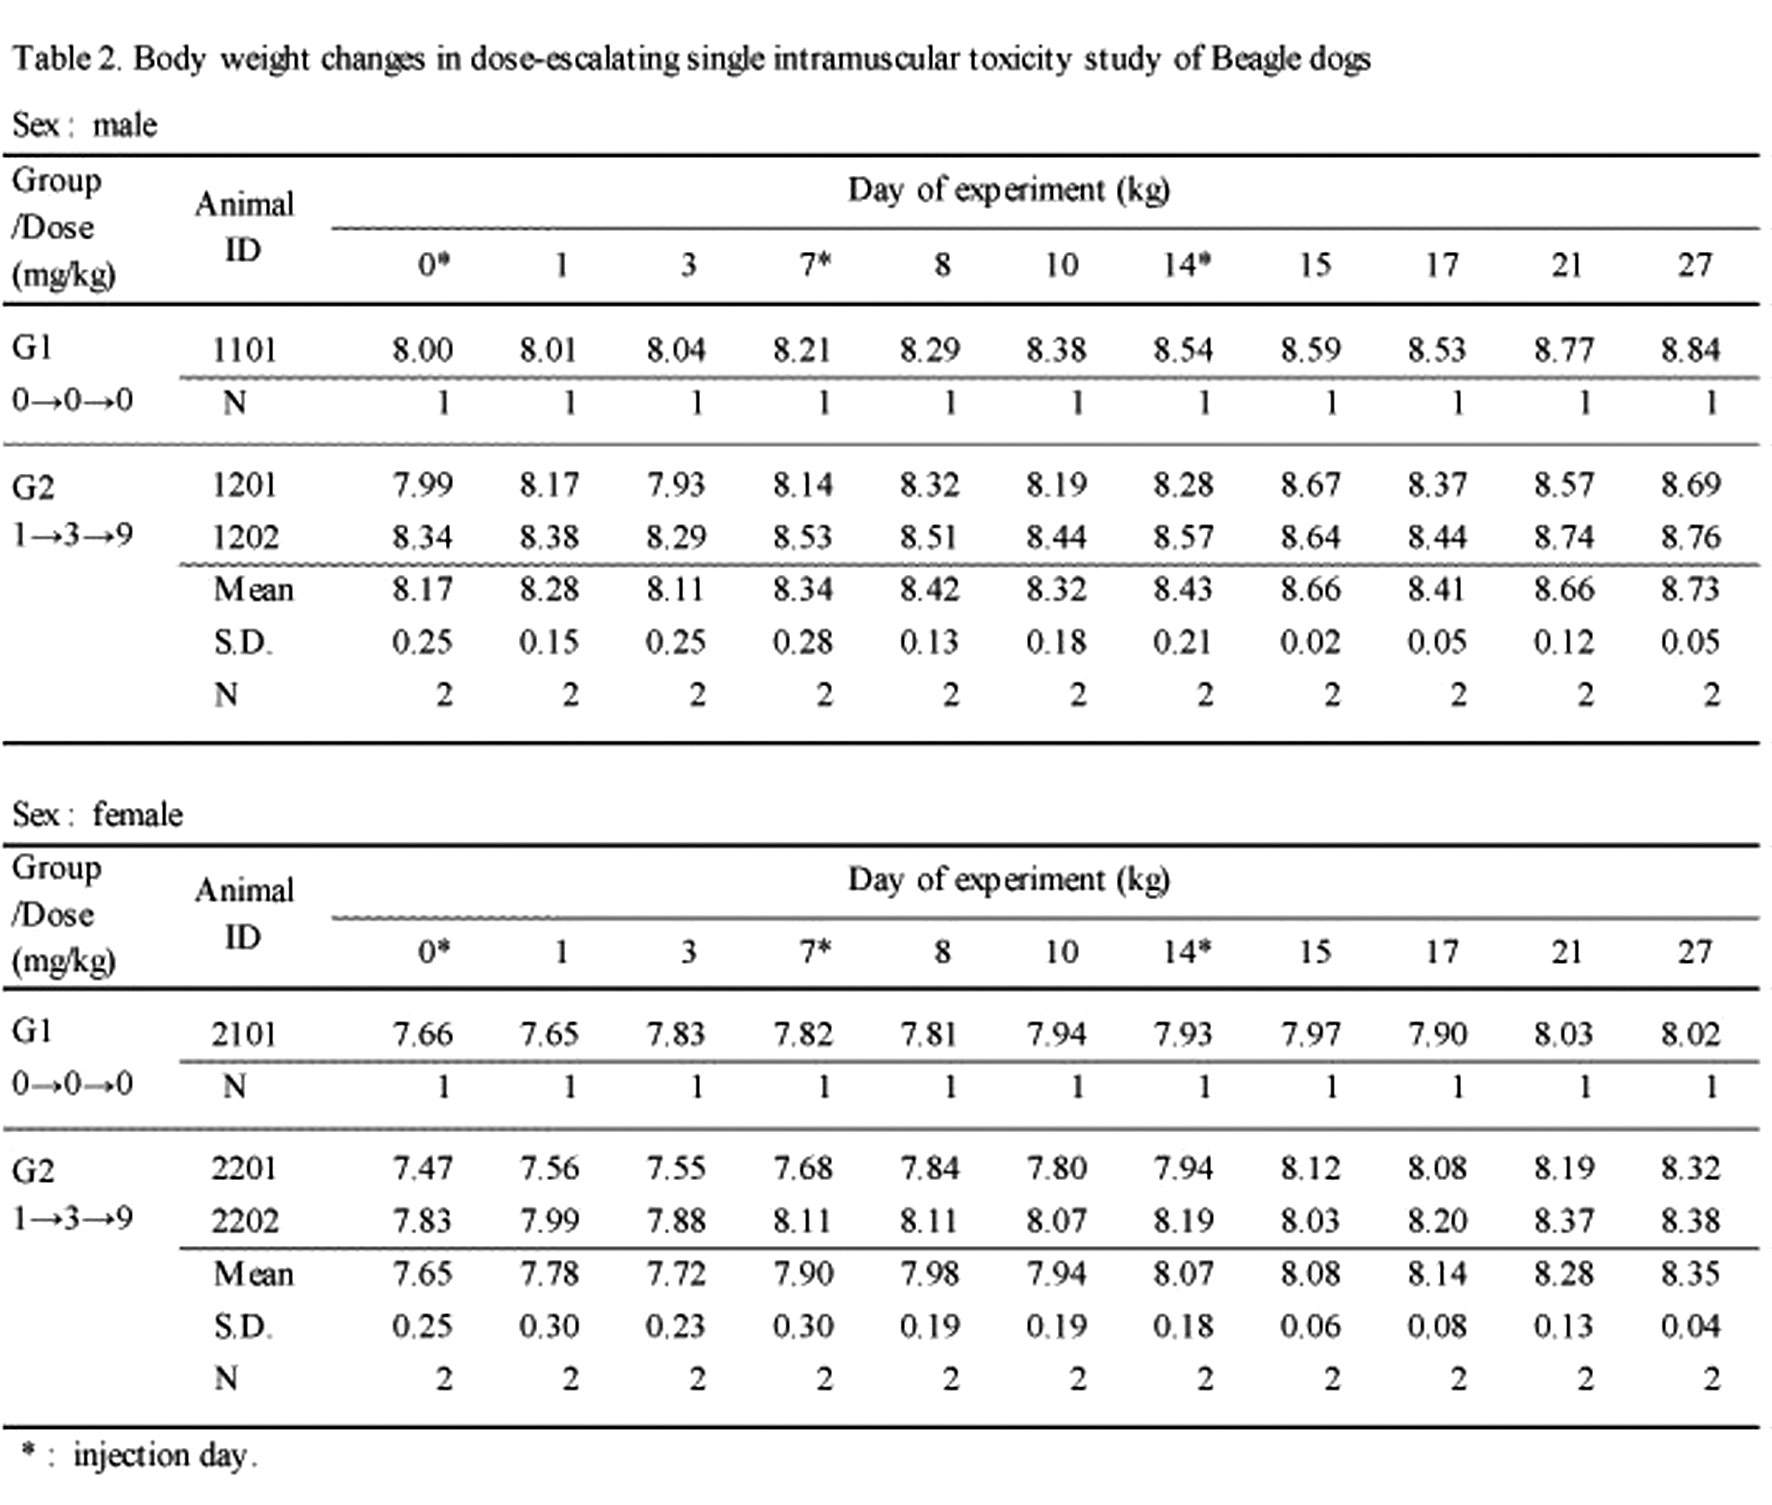 Body weight changes in dose-escalating single intramuscular toxicity study Beagle dogs